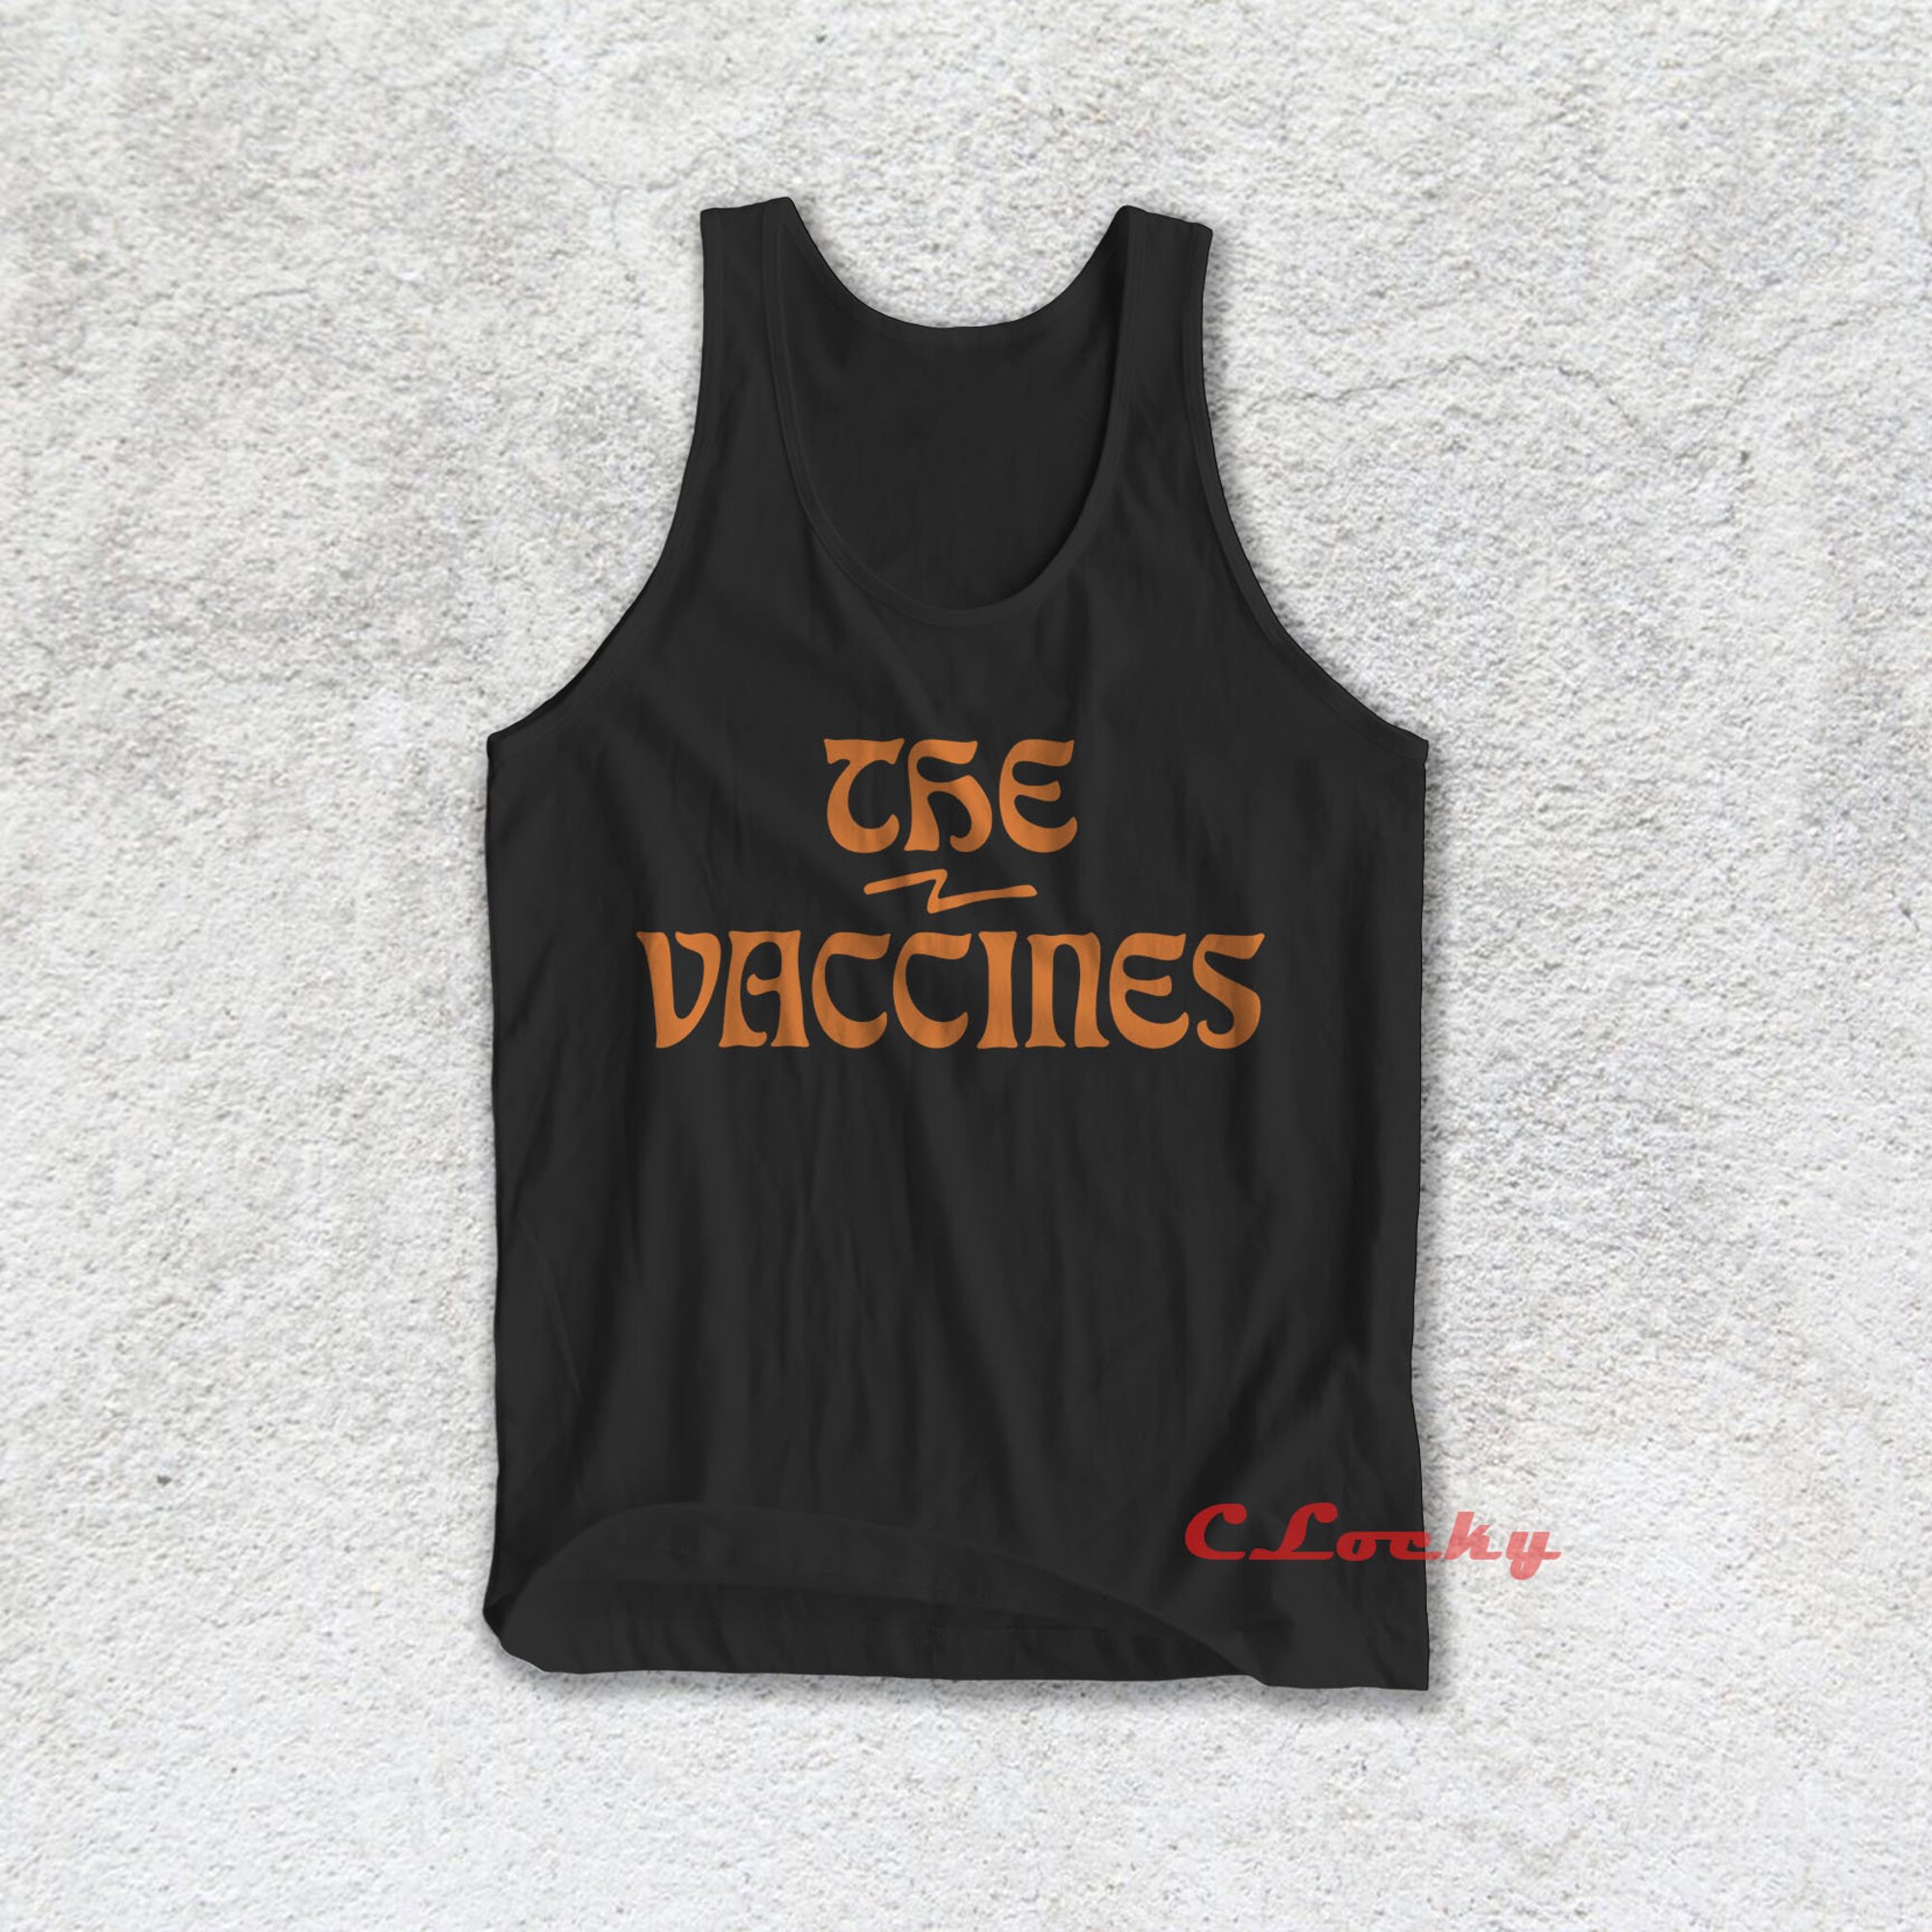 The Vaccines Tank Top English Indie Rock Justin Young Music Band Tank Top